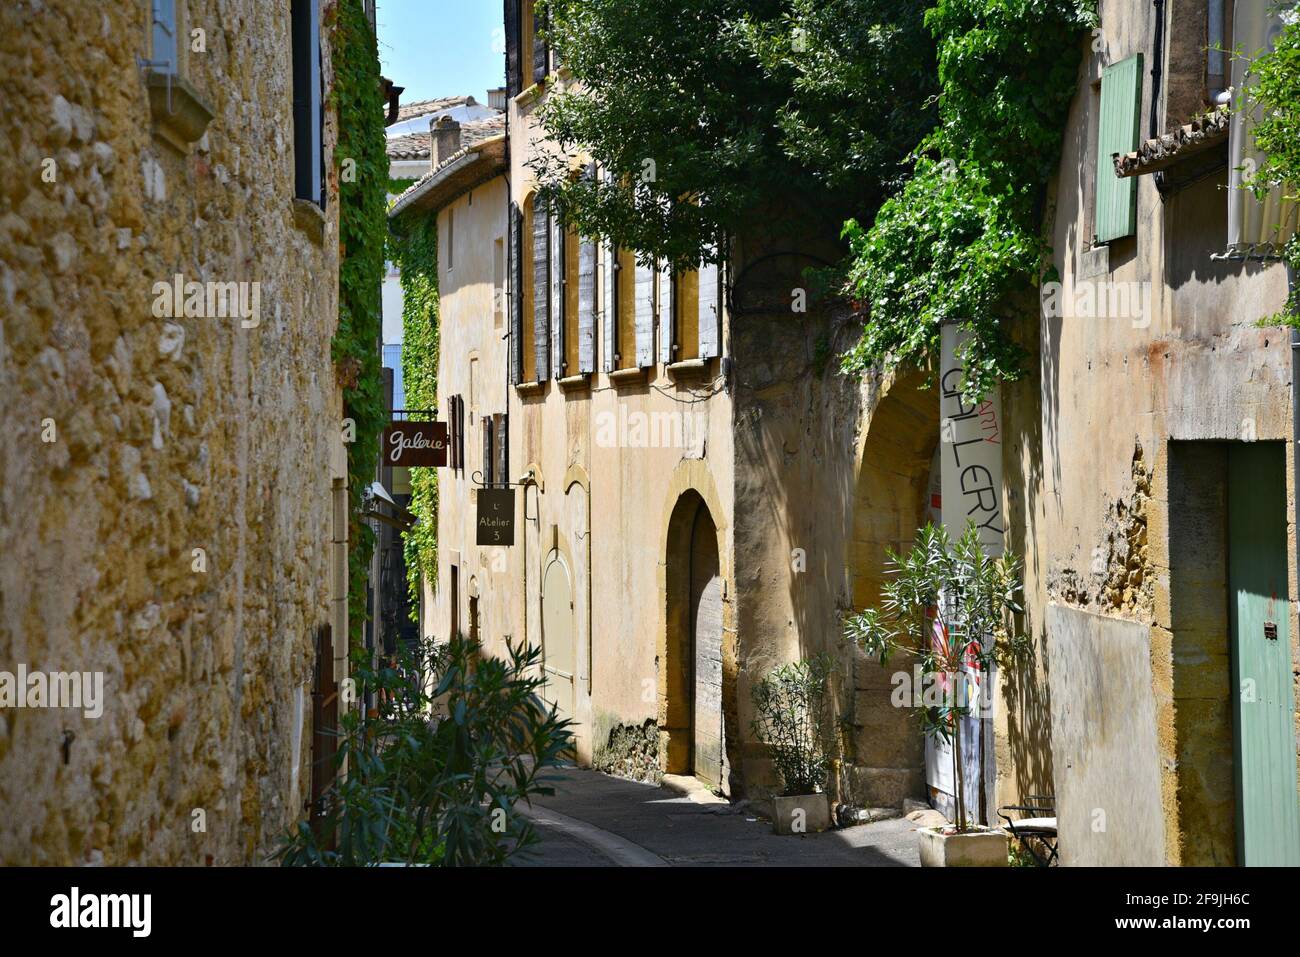 Typical Provençal style rural houses in the picturesque village of Lourmarin in Vaucluse, Provence France. Stock Photo